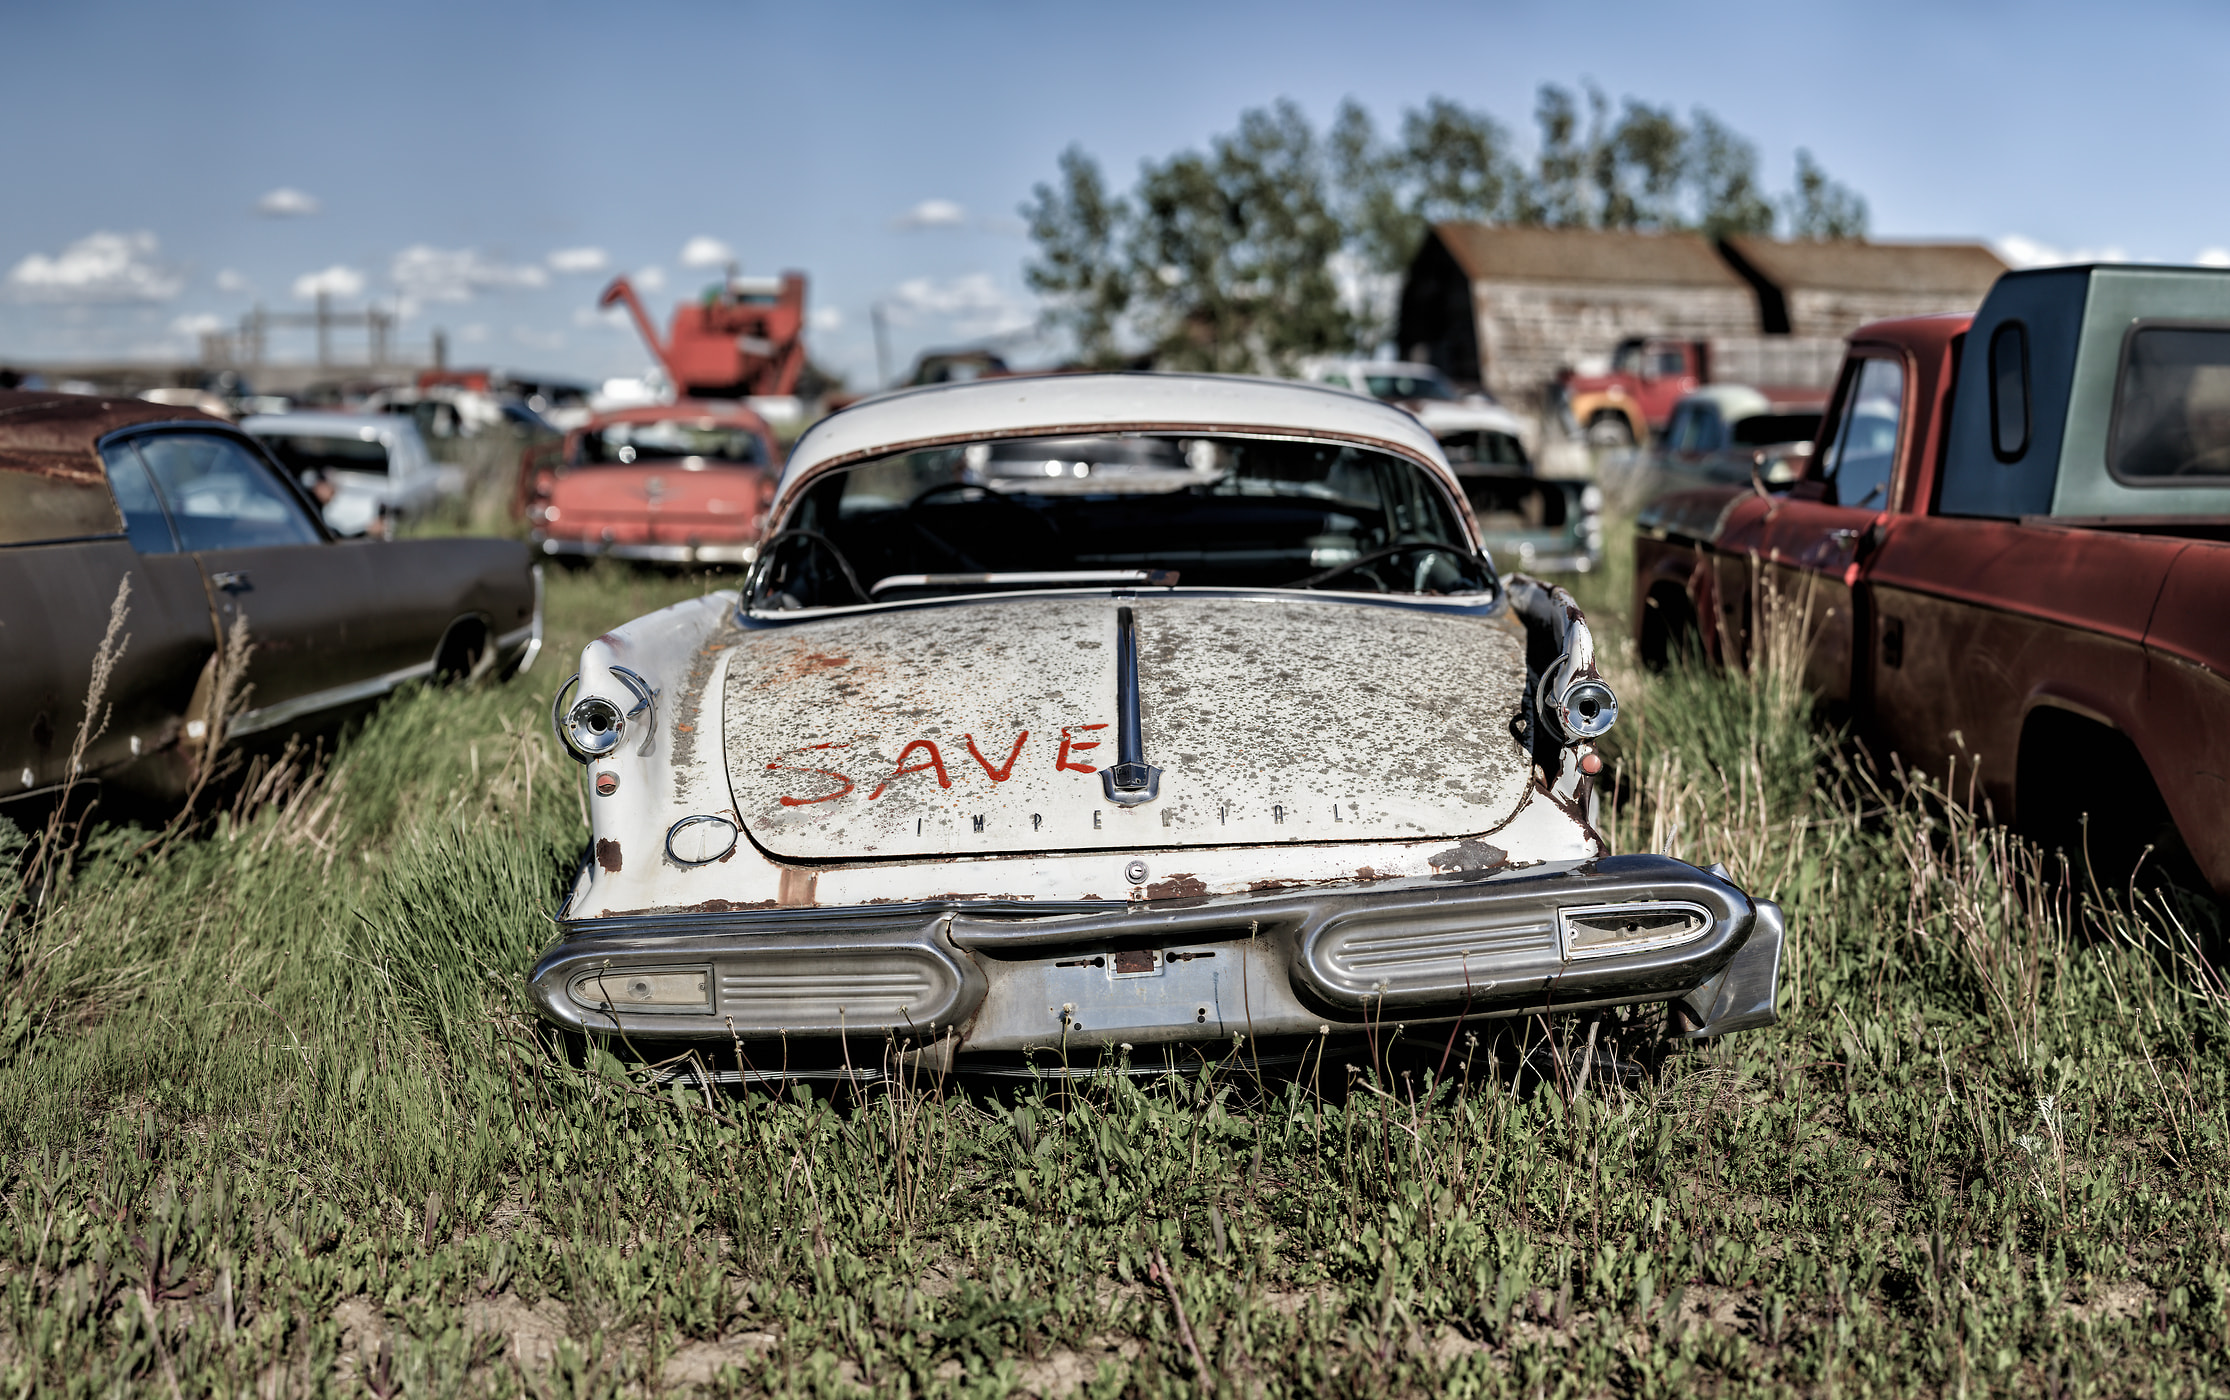 1,636 megapixels! A very high resolution, large-format VAST photo print of an abandoned car in a junkyard; photograph created by Scott Dimond in 